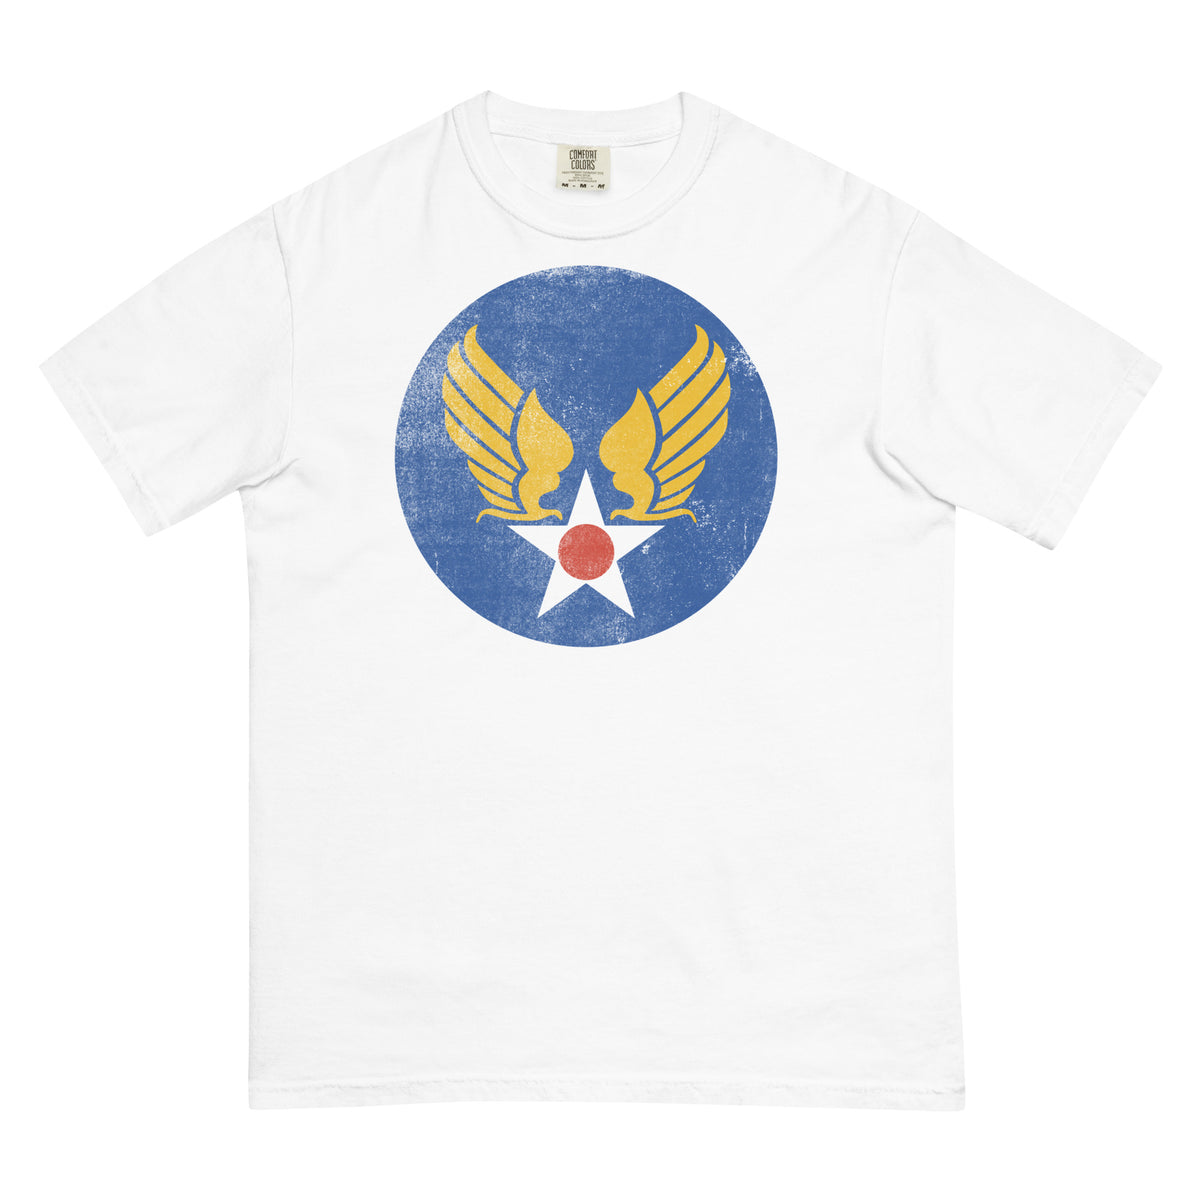 WWII Airforce Roundel Men’s Garment-dyed Heavyweight T-Shirt